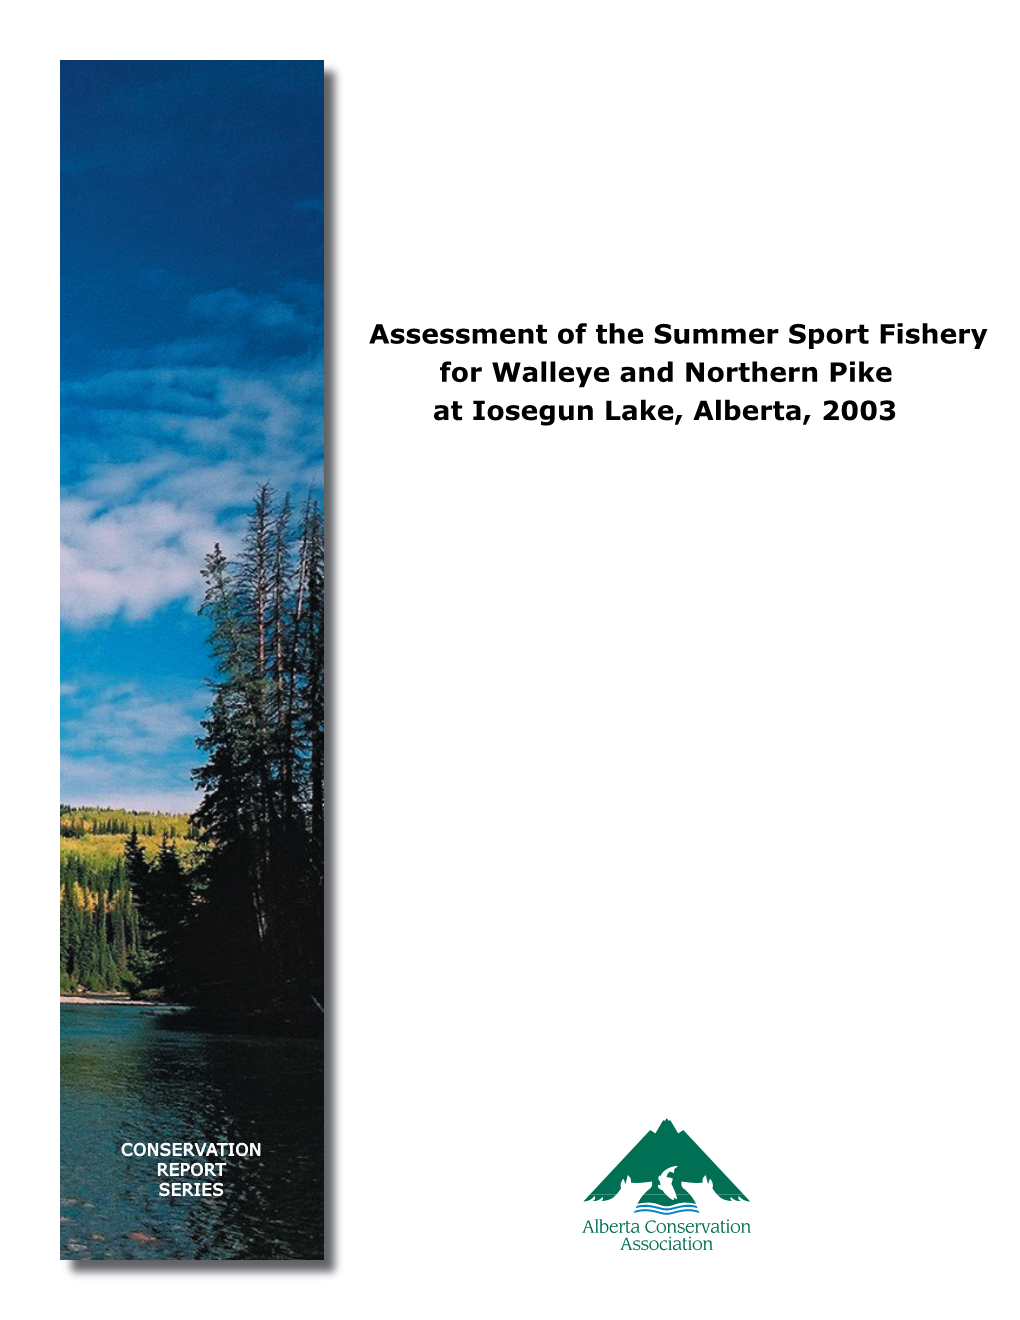 Assessment of the Summer Sport Fishery for Walleye and Northern Pike at Iosegun Lake, Alberta, 2003